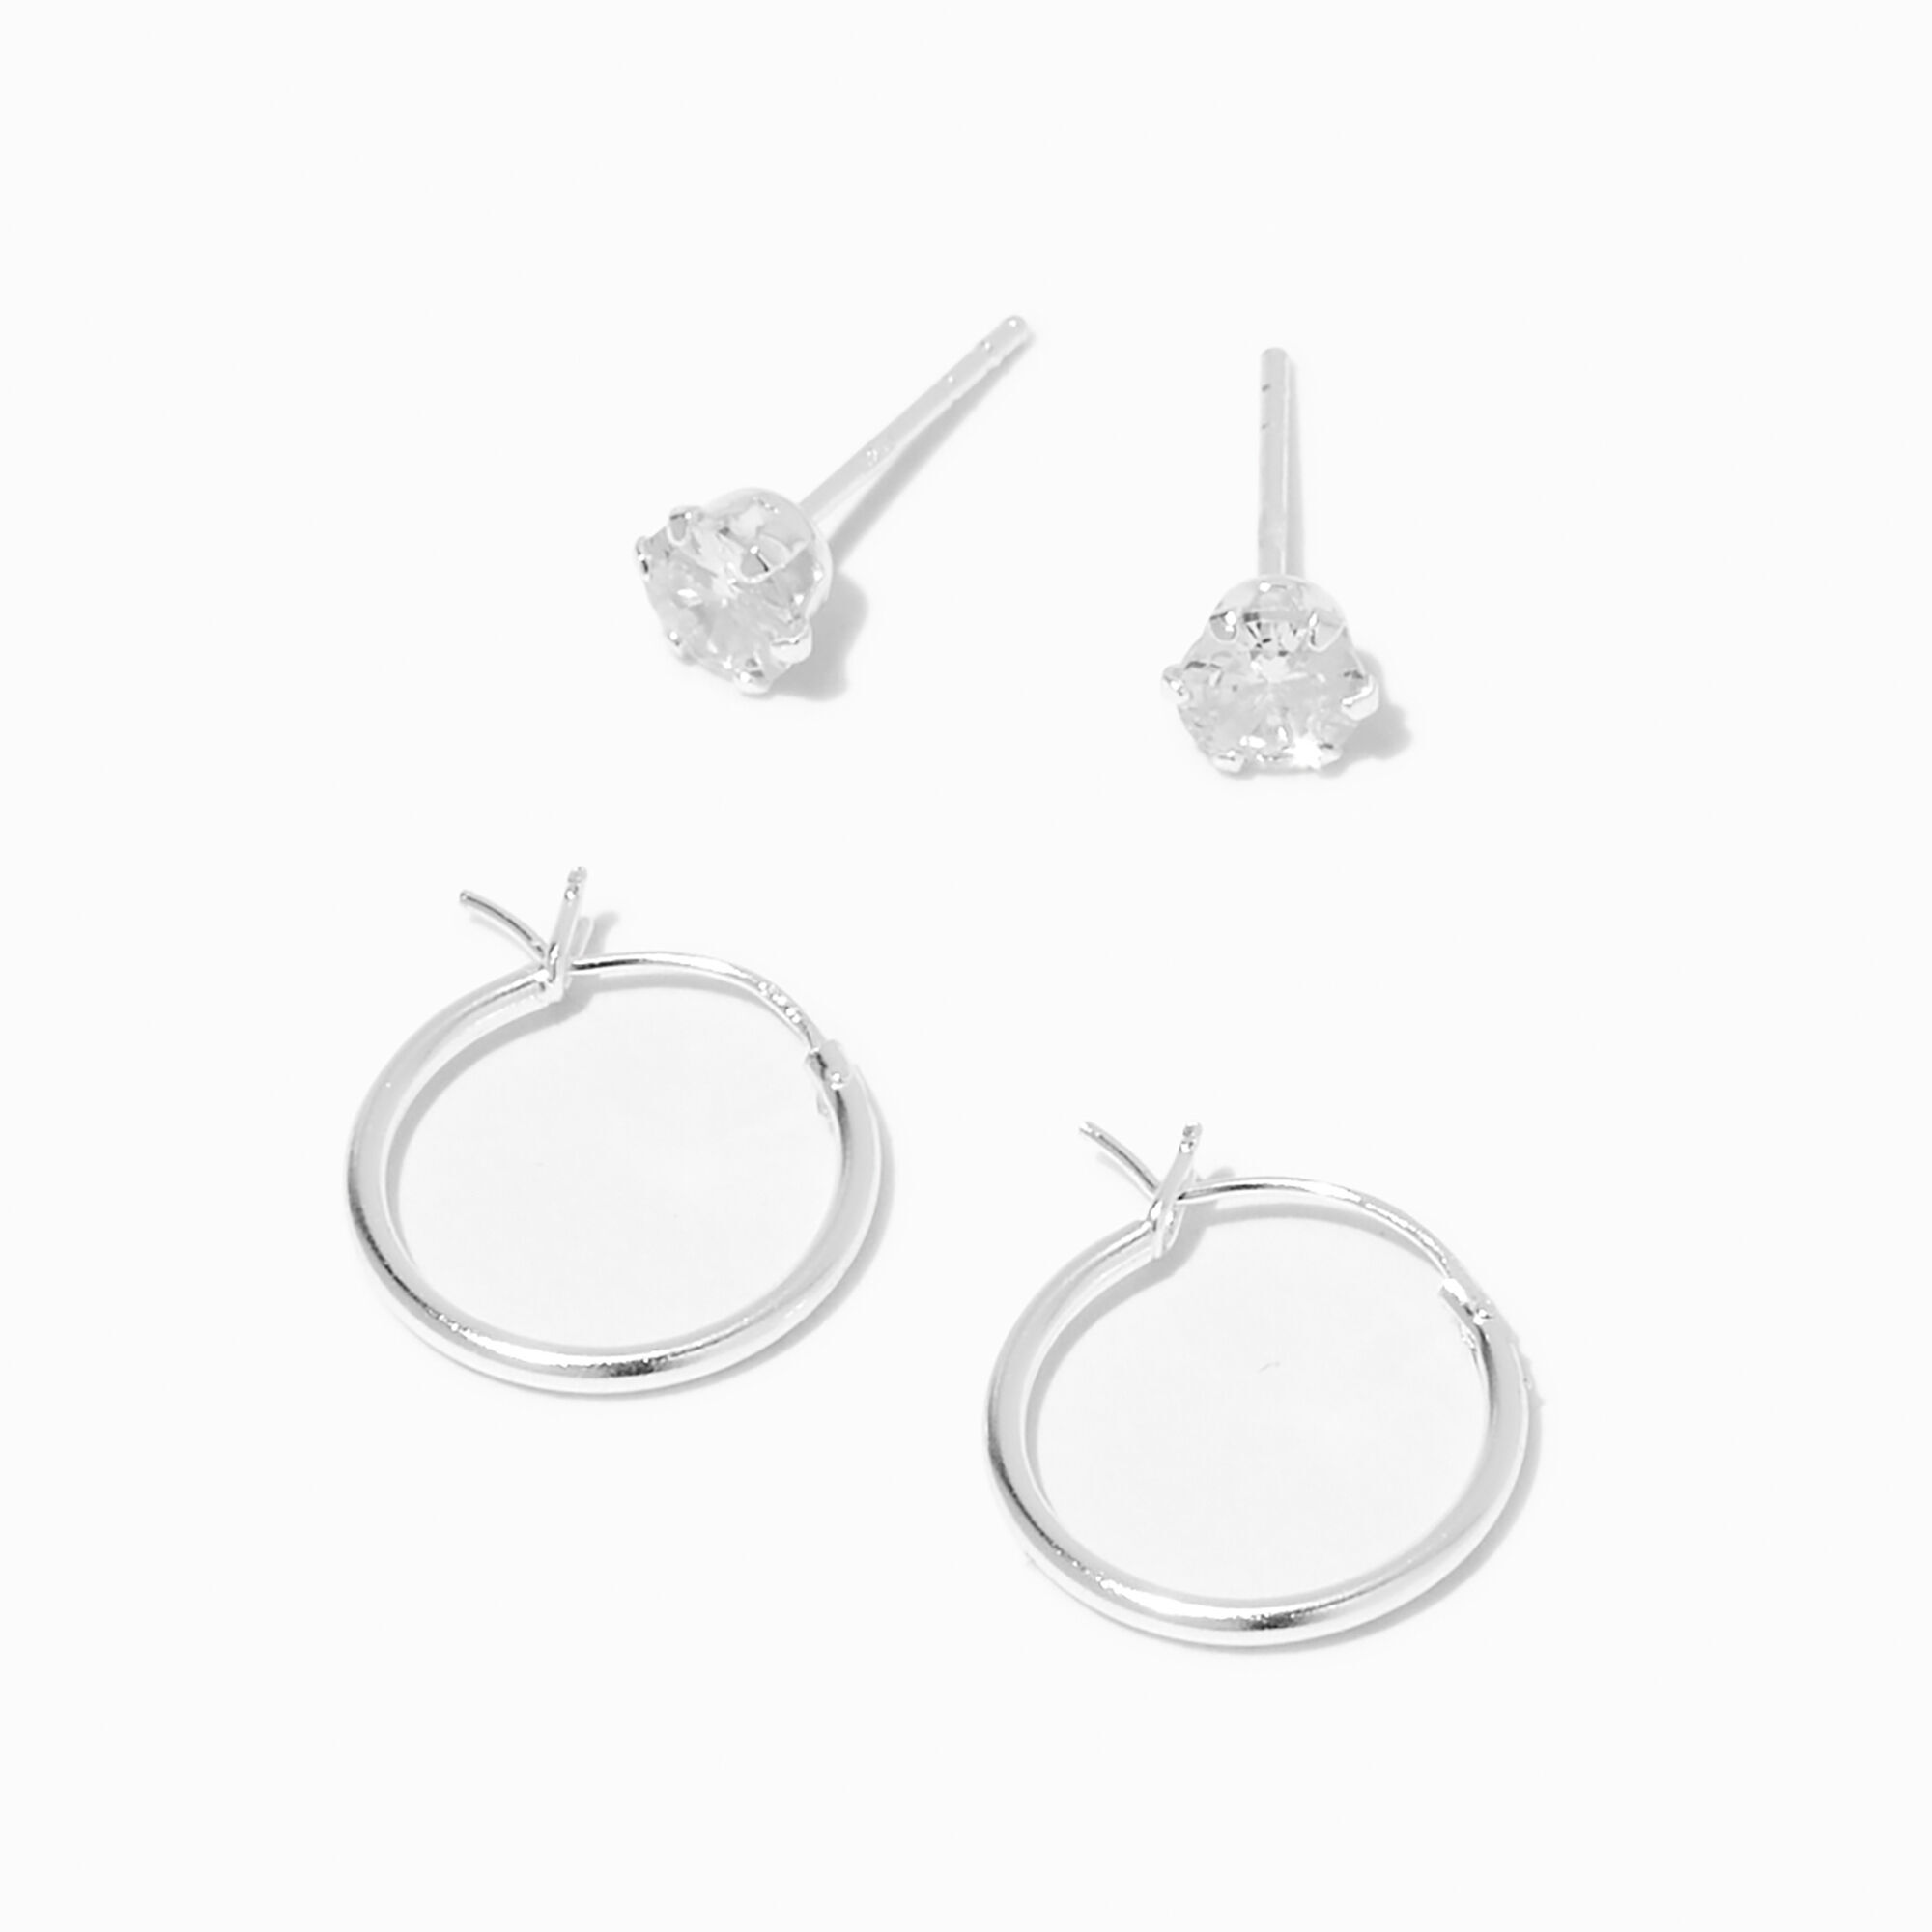 View C Luxe By Claires Cubic Zirconia 5MM Round Stud 14MM Hoop Earrings Silver information